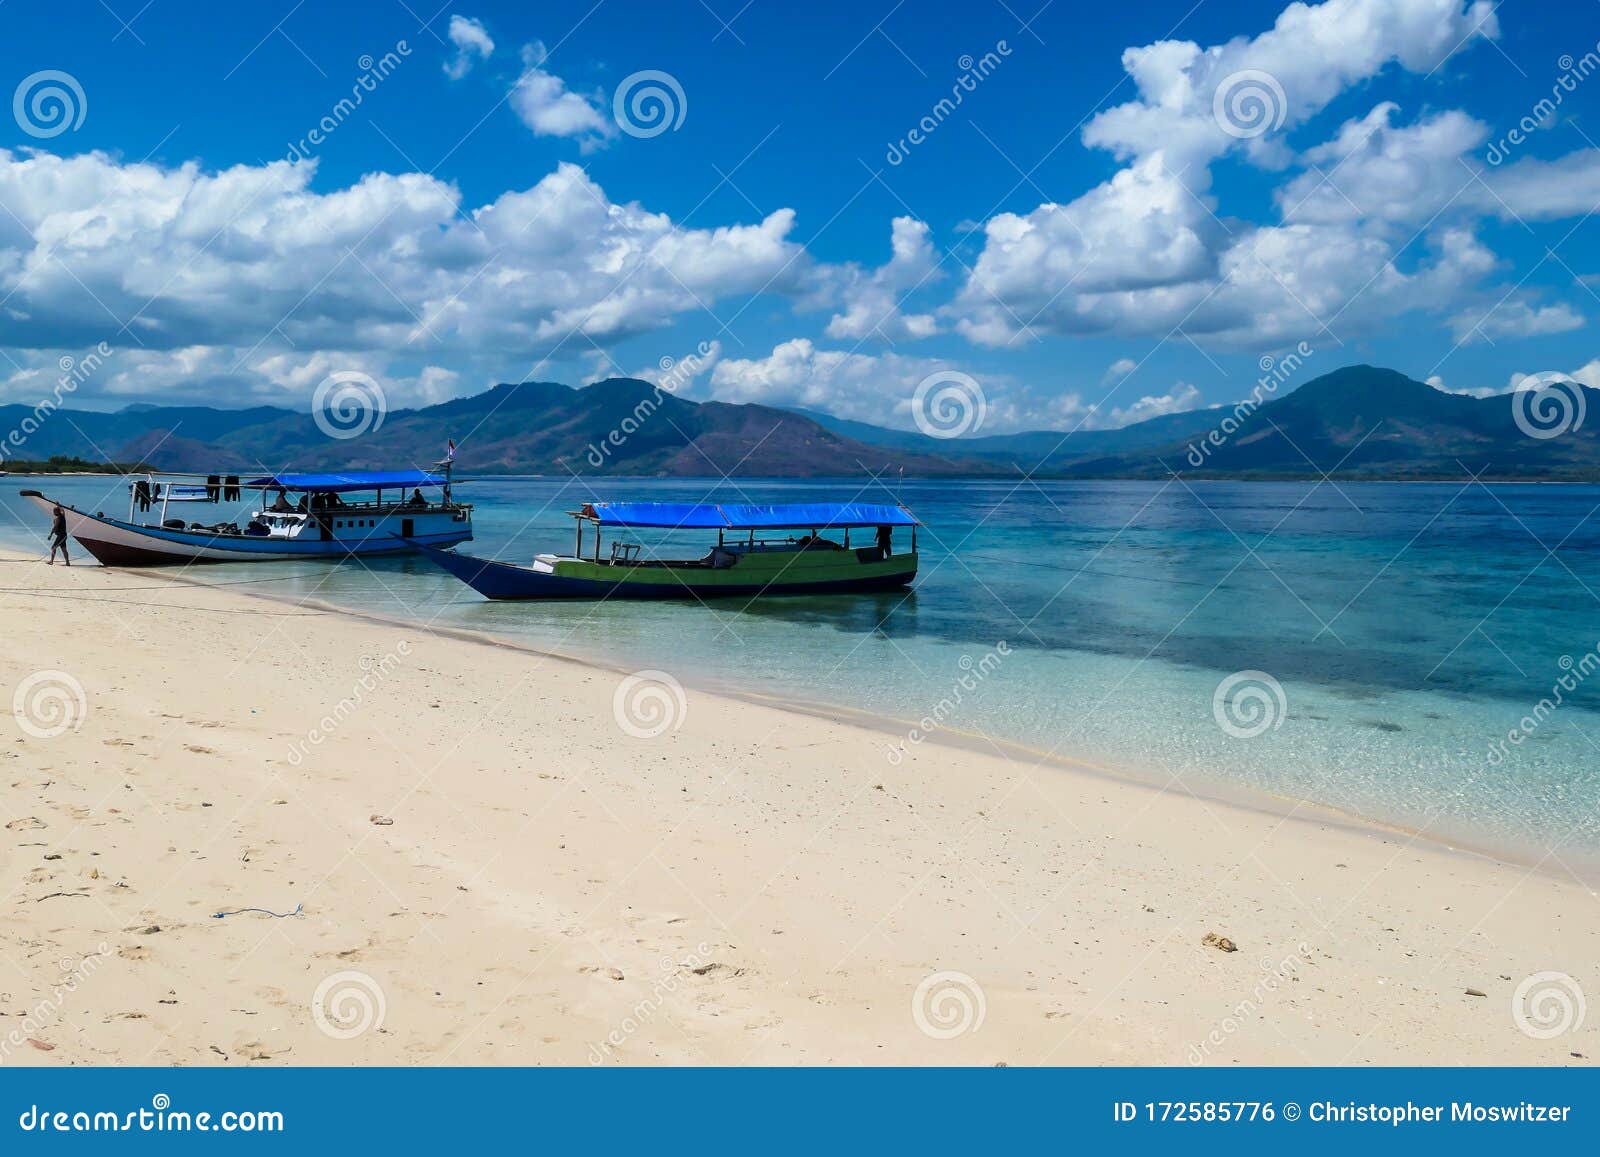 maumere - an idyllic beach with boats anchored on the shore